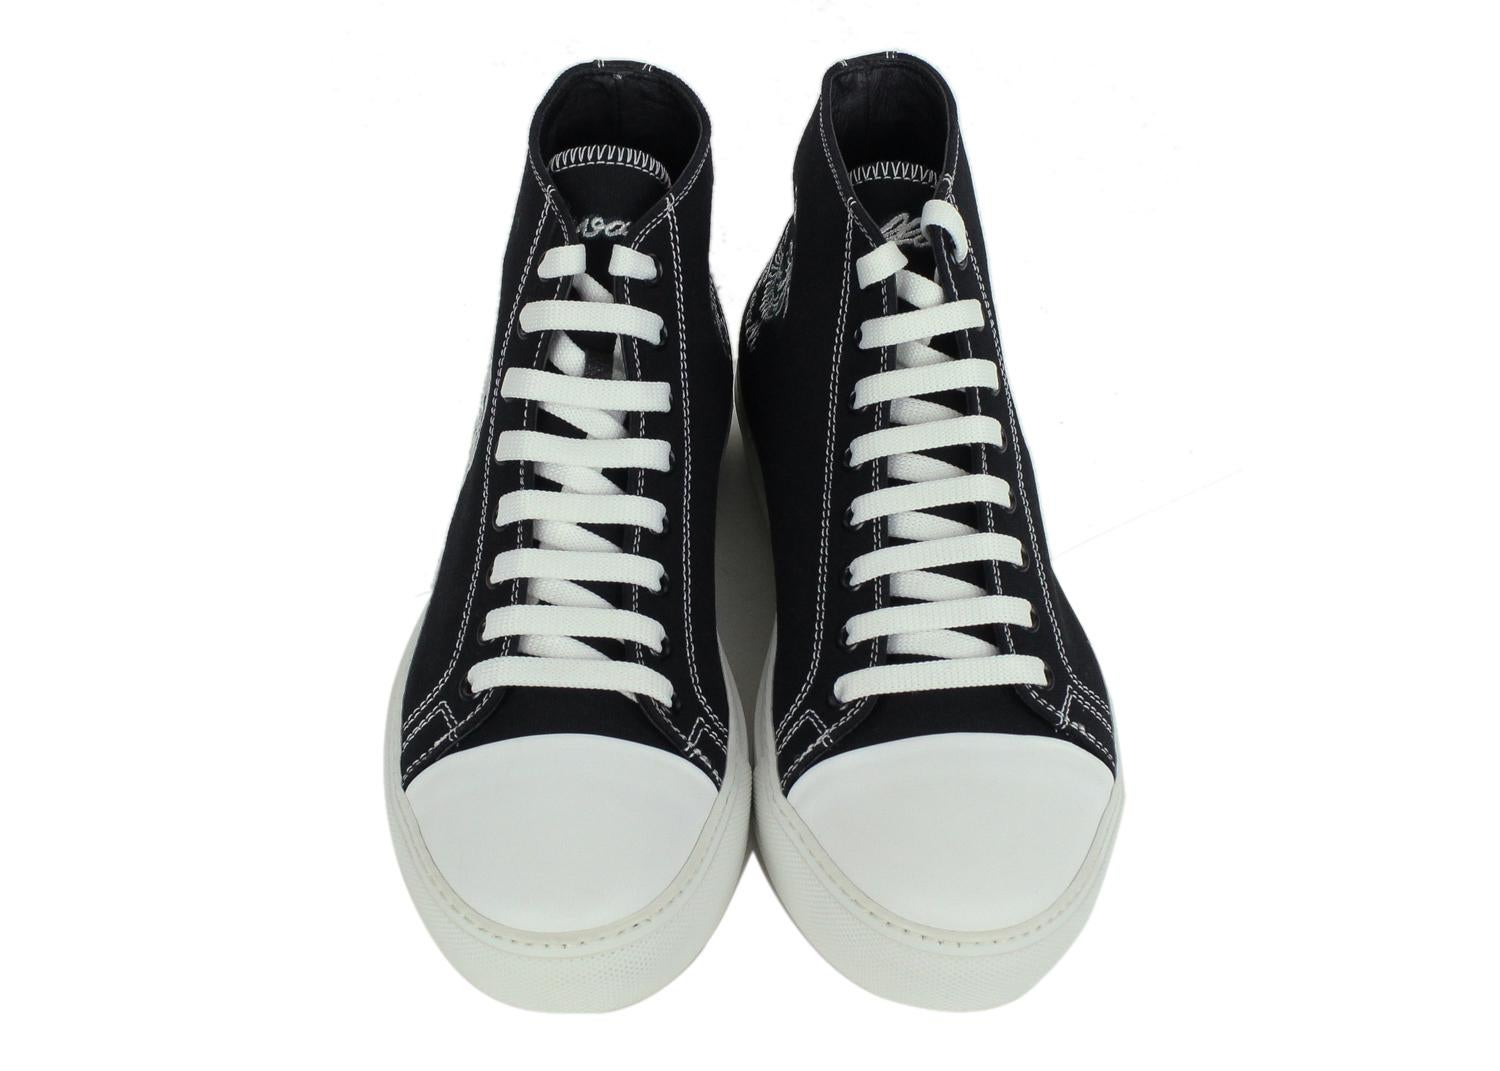 Roberto Cavalli Mens Black Embroidered High Top Sneakers. These sneakers feature the Roberto Cavalli signature on the inner outside of sneaker. These high top sneakers have an embroidered angel wing and would look great with a pair of straight